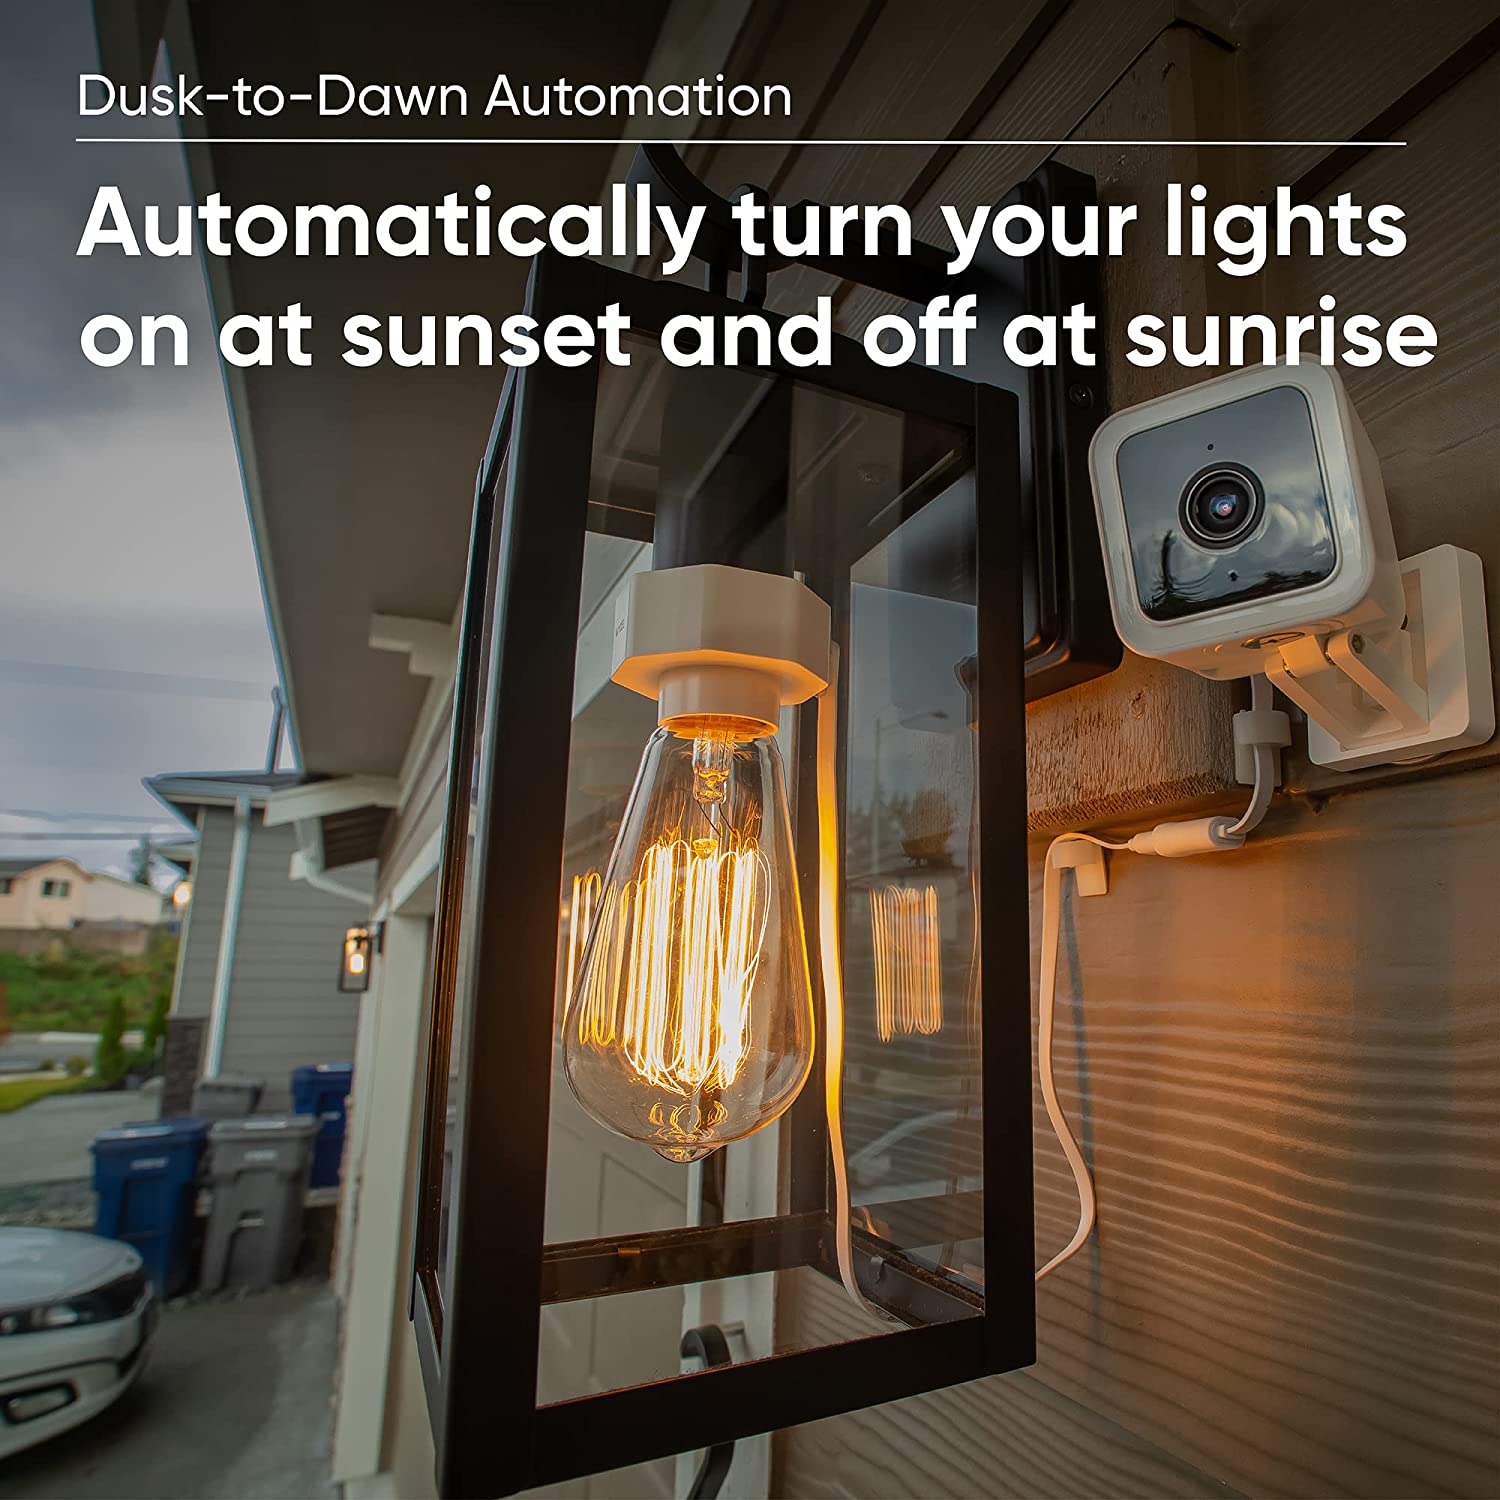 Wyze Lamp Socket with an edison bulb installed and is turned on. Wyze Cam v3 with wiring lining the wall and attached to the Lamp Socket. Text overlay that says "Dusk to Dawn automation."